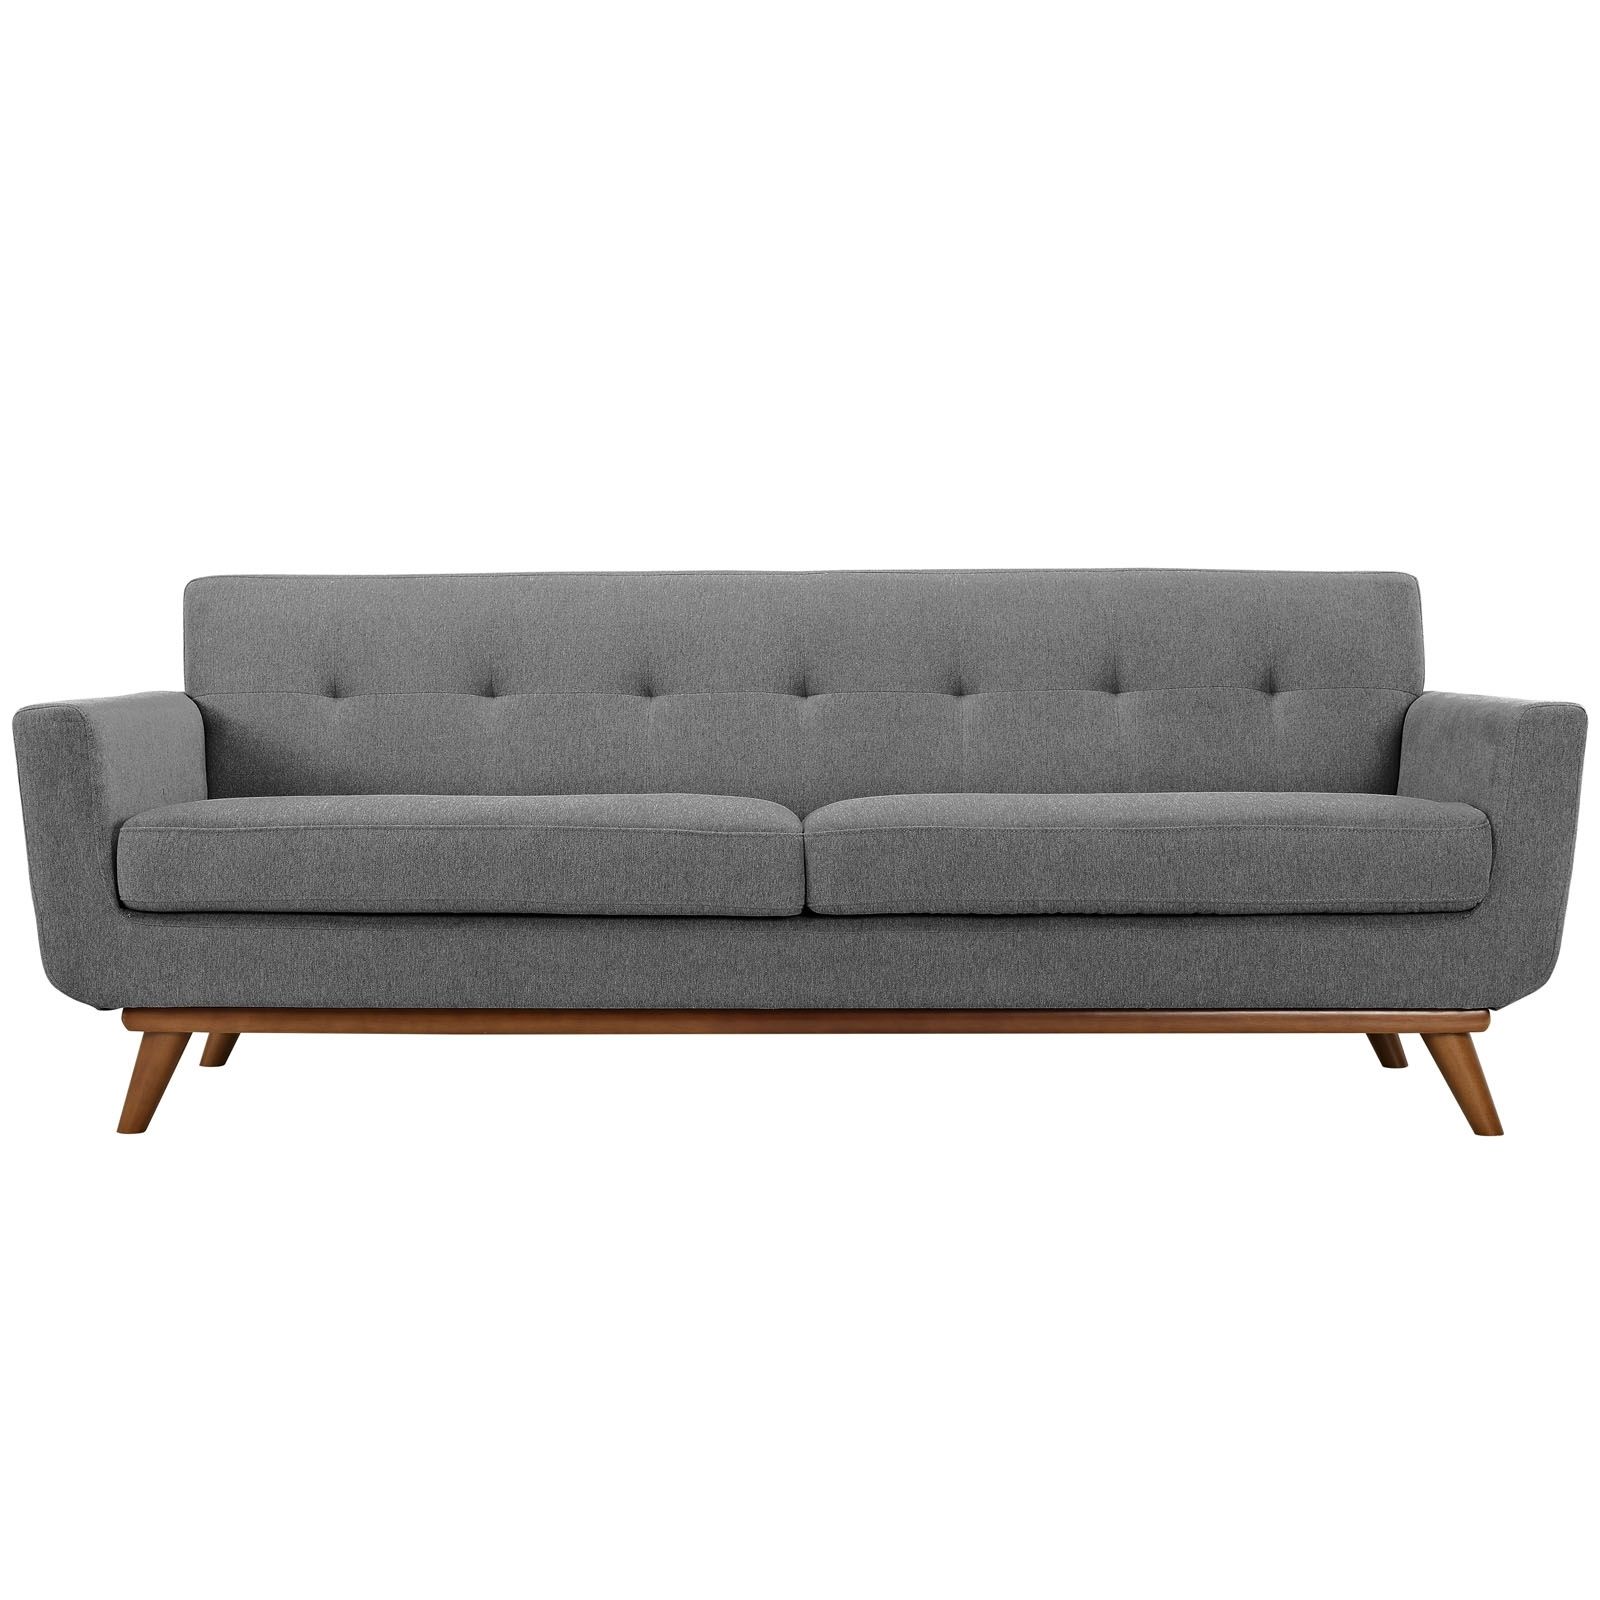 Sofas & Couches – Walmart Pertaining To Most Up To Date Sectional Sofas At Walmart (View 13 of 20)